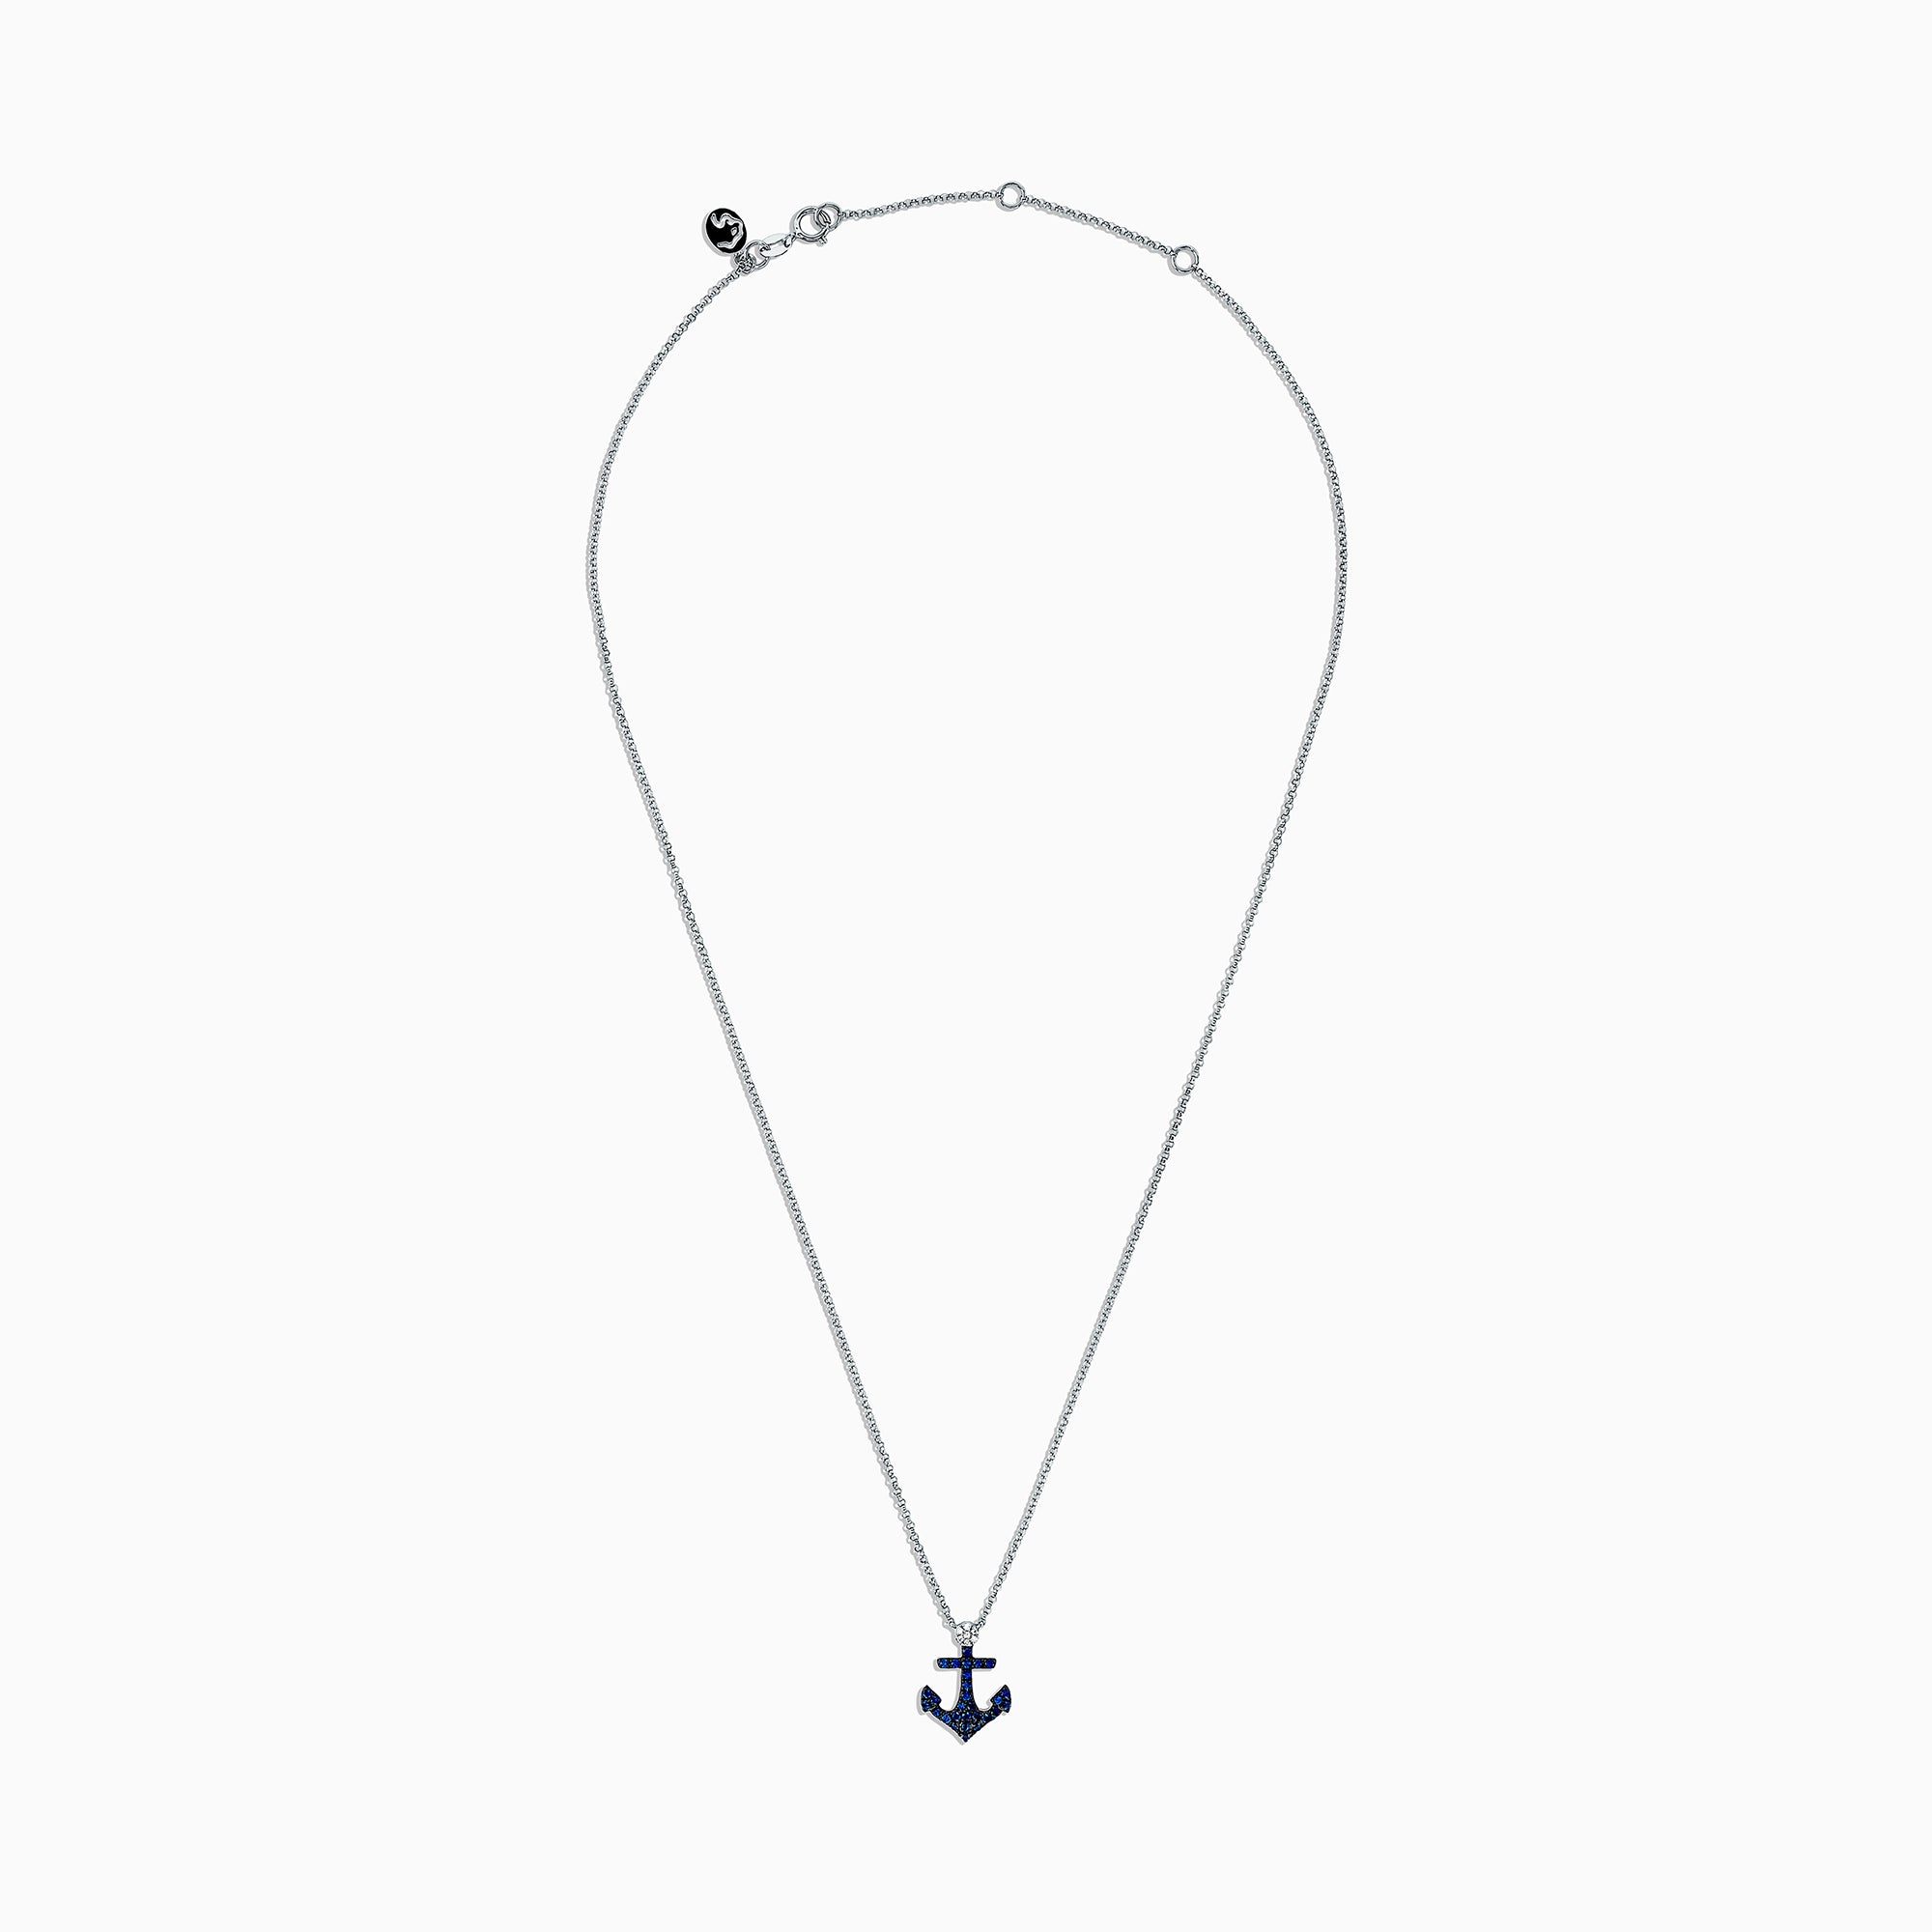 08 CTTW Diamond Anchor Necklace in White Gold | New York Jewelers Chicago